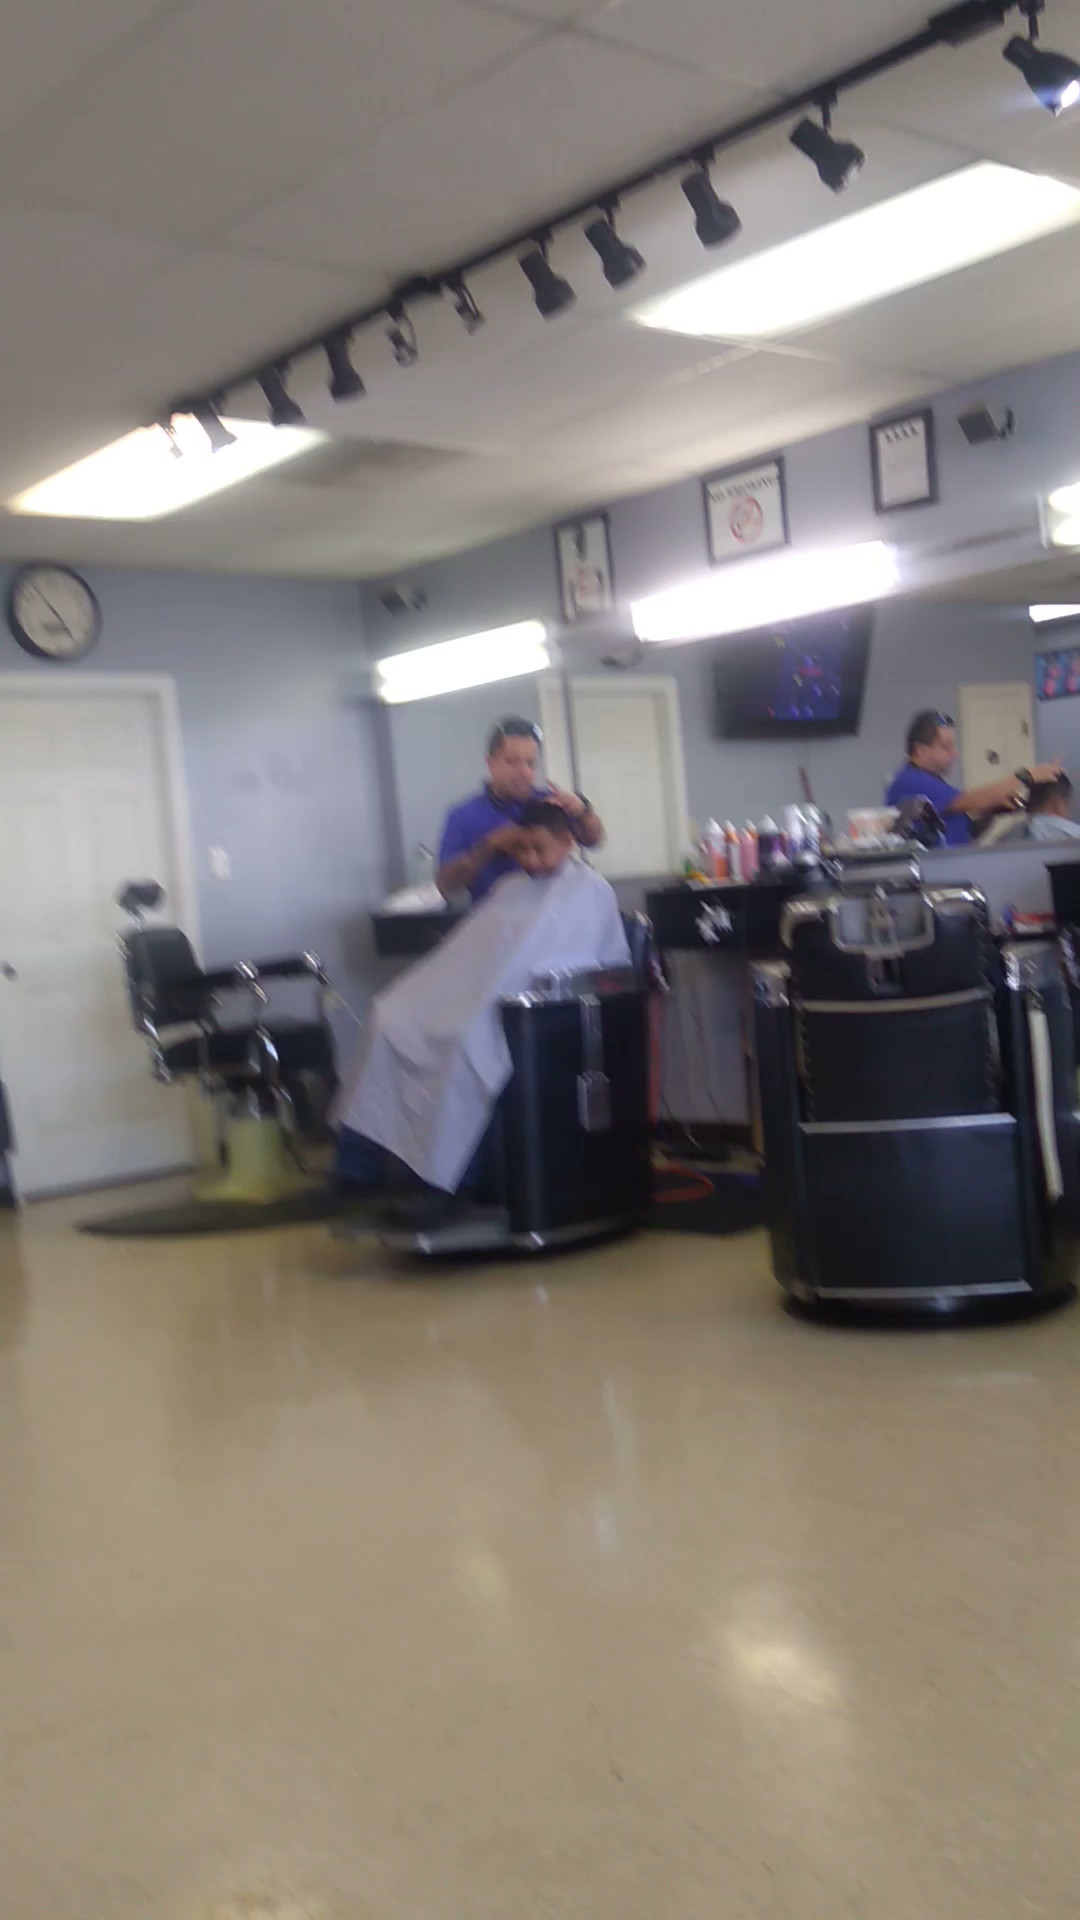 D & D Professional Barber Shop 9 Curtis Ave, Woodbury New Jersey 08096